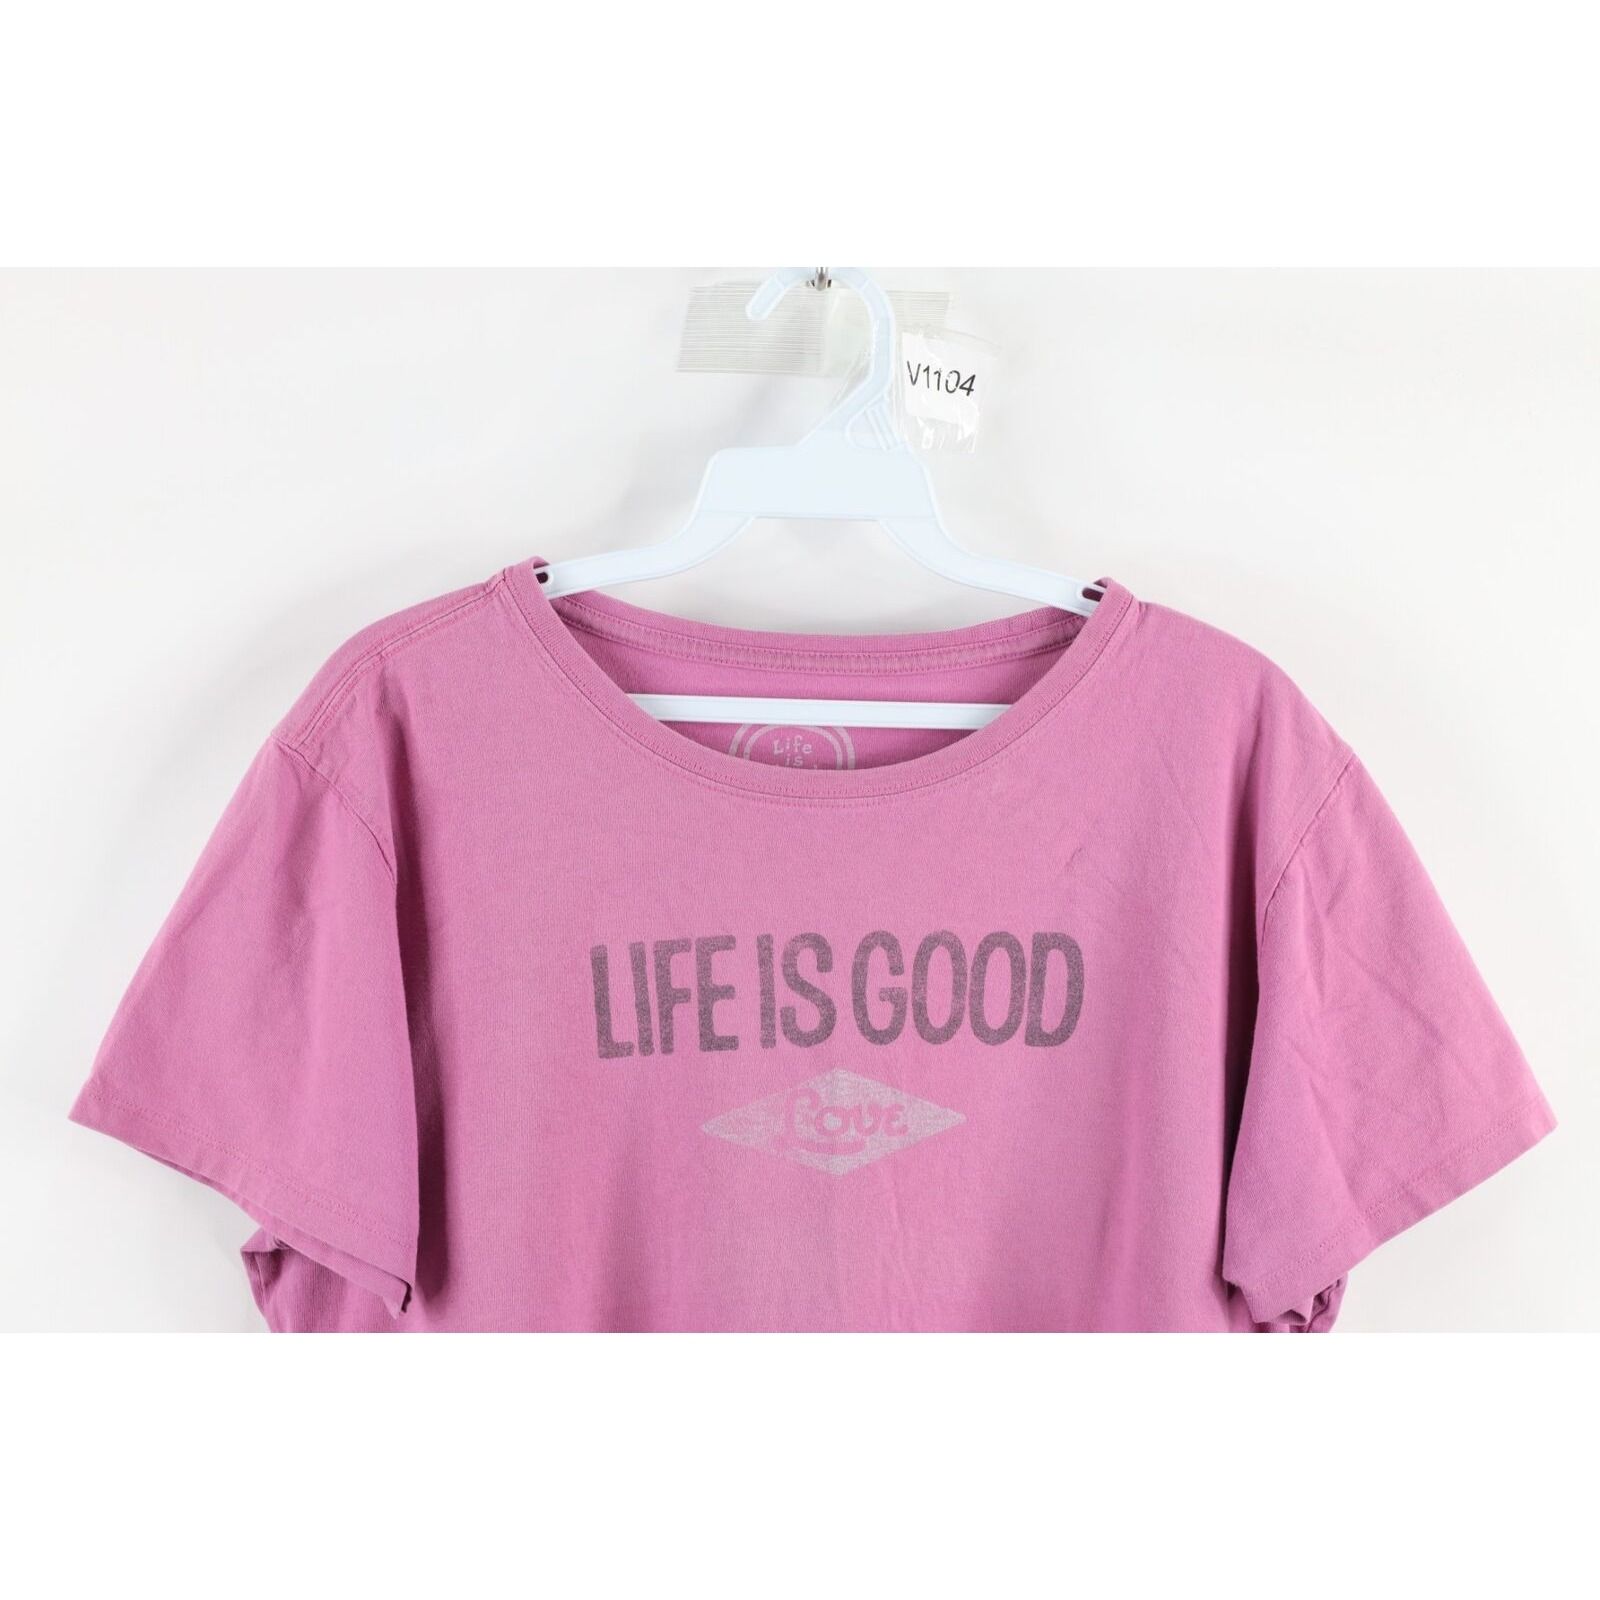 Vintage Vintage Life is Good Distressed Love Short Sleeve T-Shirt Size L / US 10 / IT 46 - 2 Preview